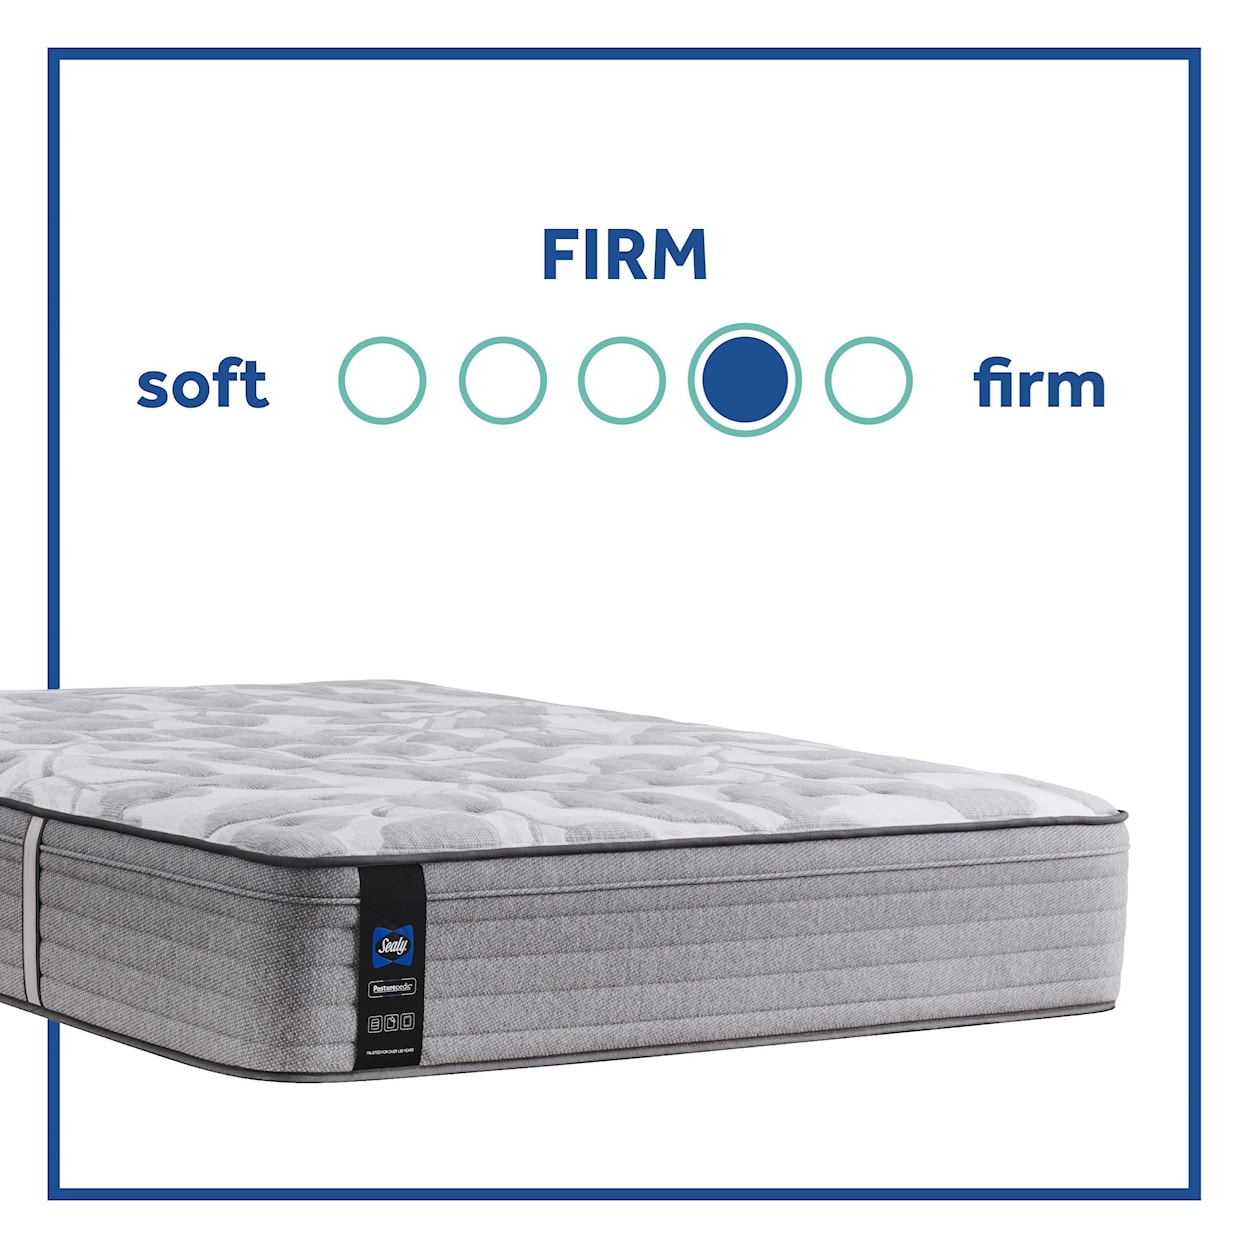 Sealy PPS5 Posturpedic Innerspring Firm FXET King 14" Firm Faux Euro Top Mattress Set